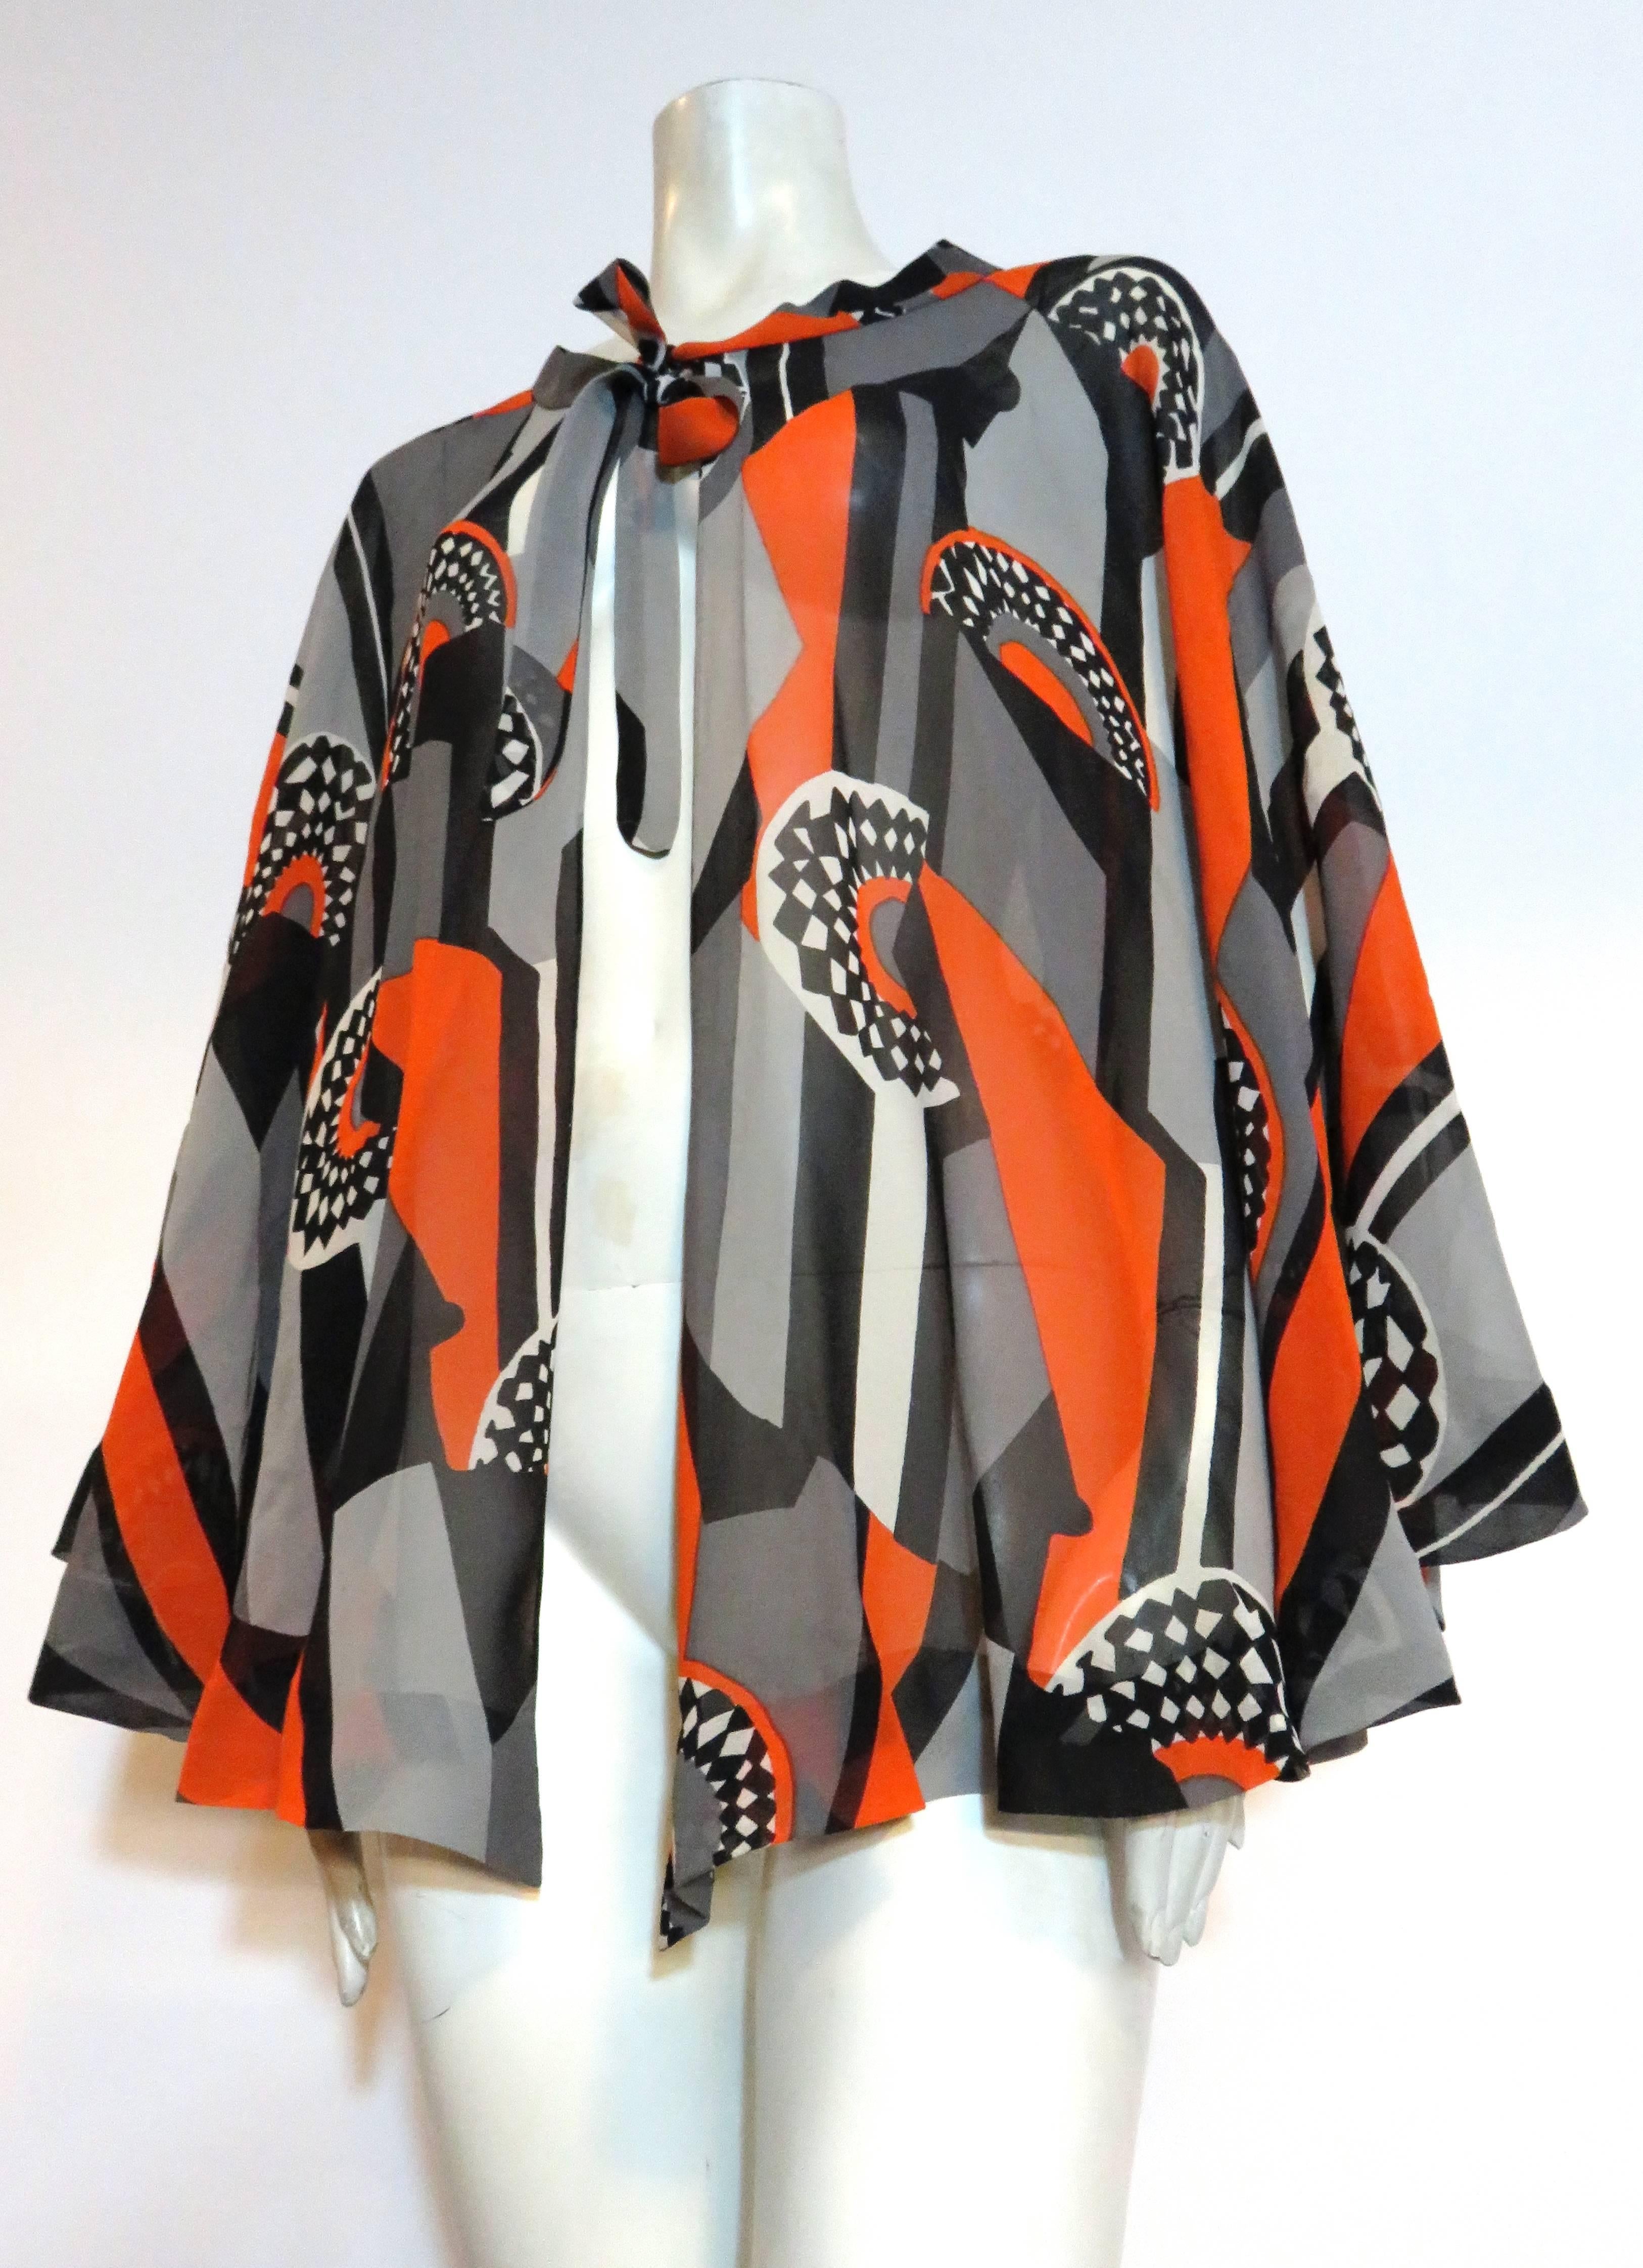 Excellent condition, 1970's LA MENDOLA Deco printed silk cape.

Semi-sheer, silk chiffon fabrication with wonderful, art-deco inspired artwork print in tangerine, black, and gray.

Tied neck for an adjustable fit.  The cape can really